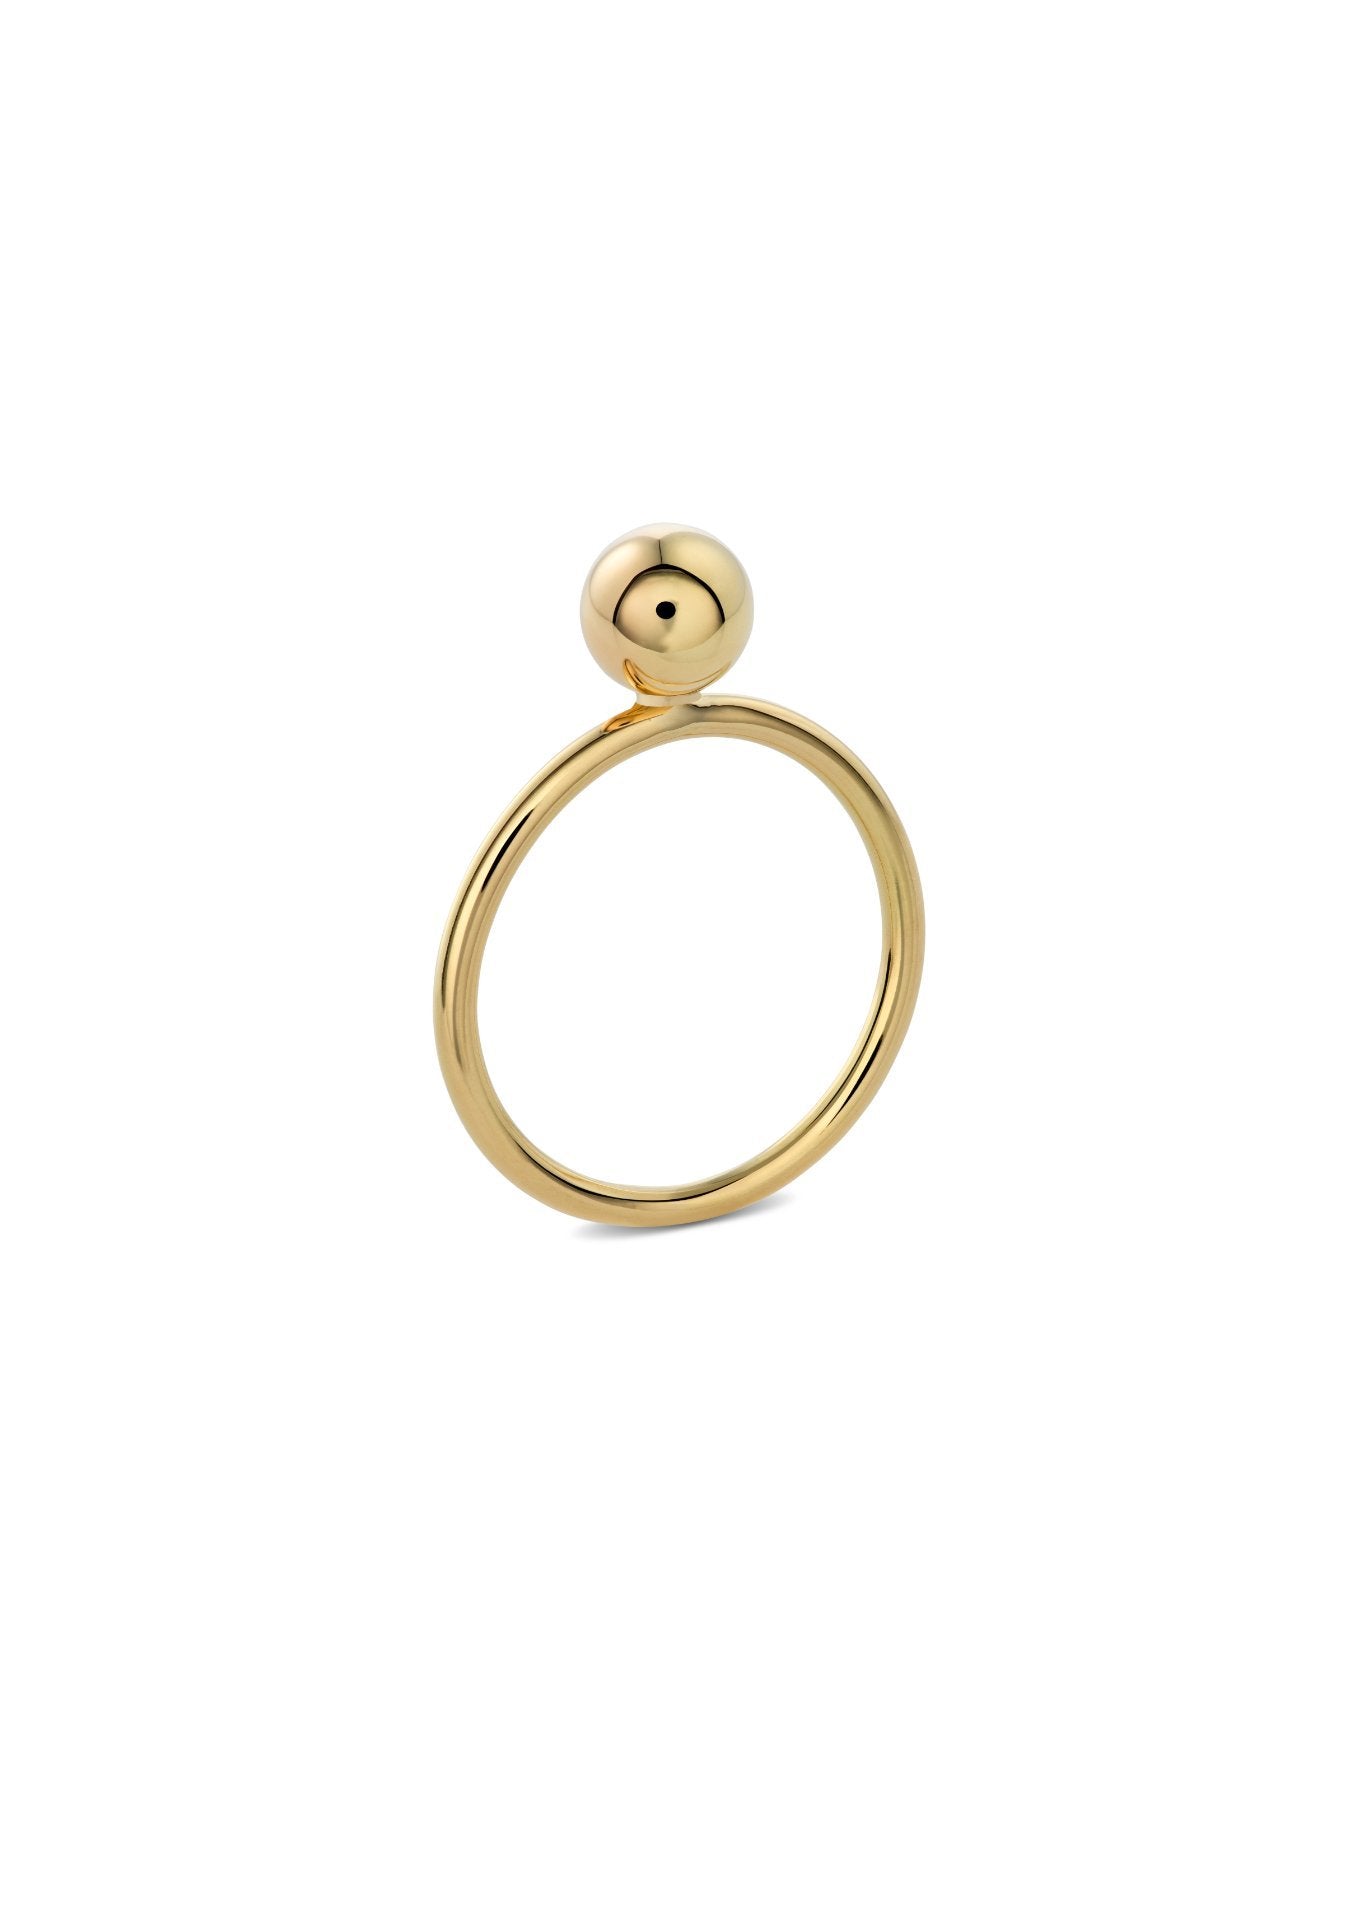 NO MORE accessories Sweet Goldie Ring in 18k Gold